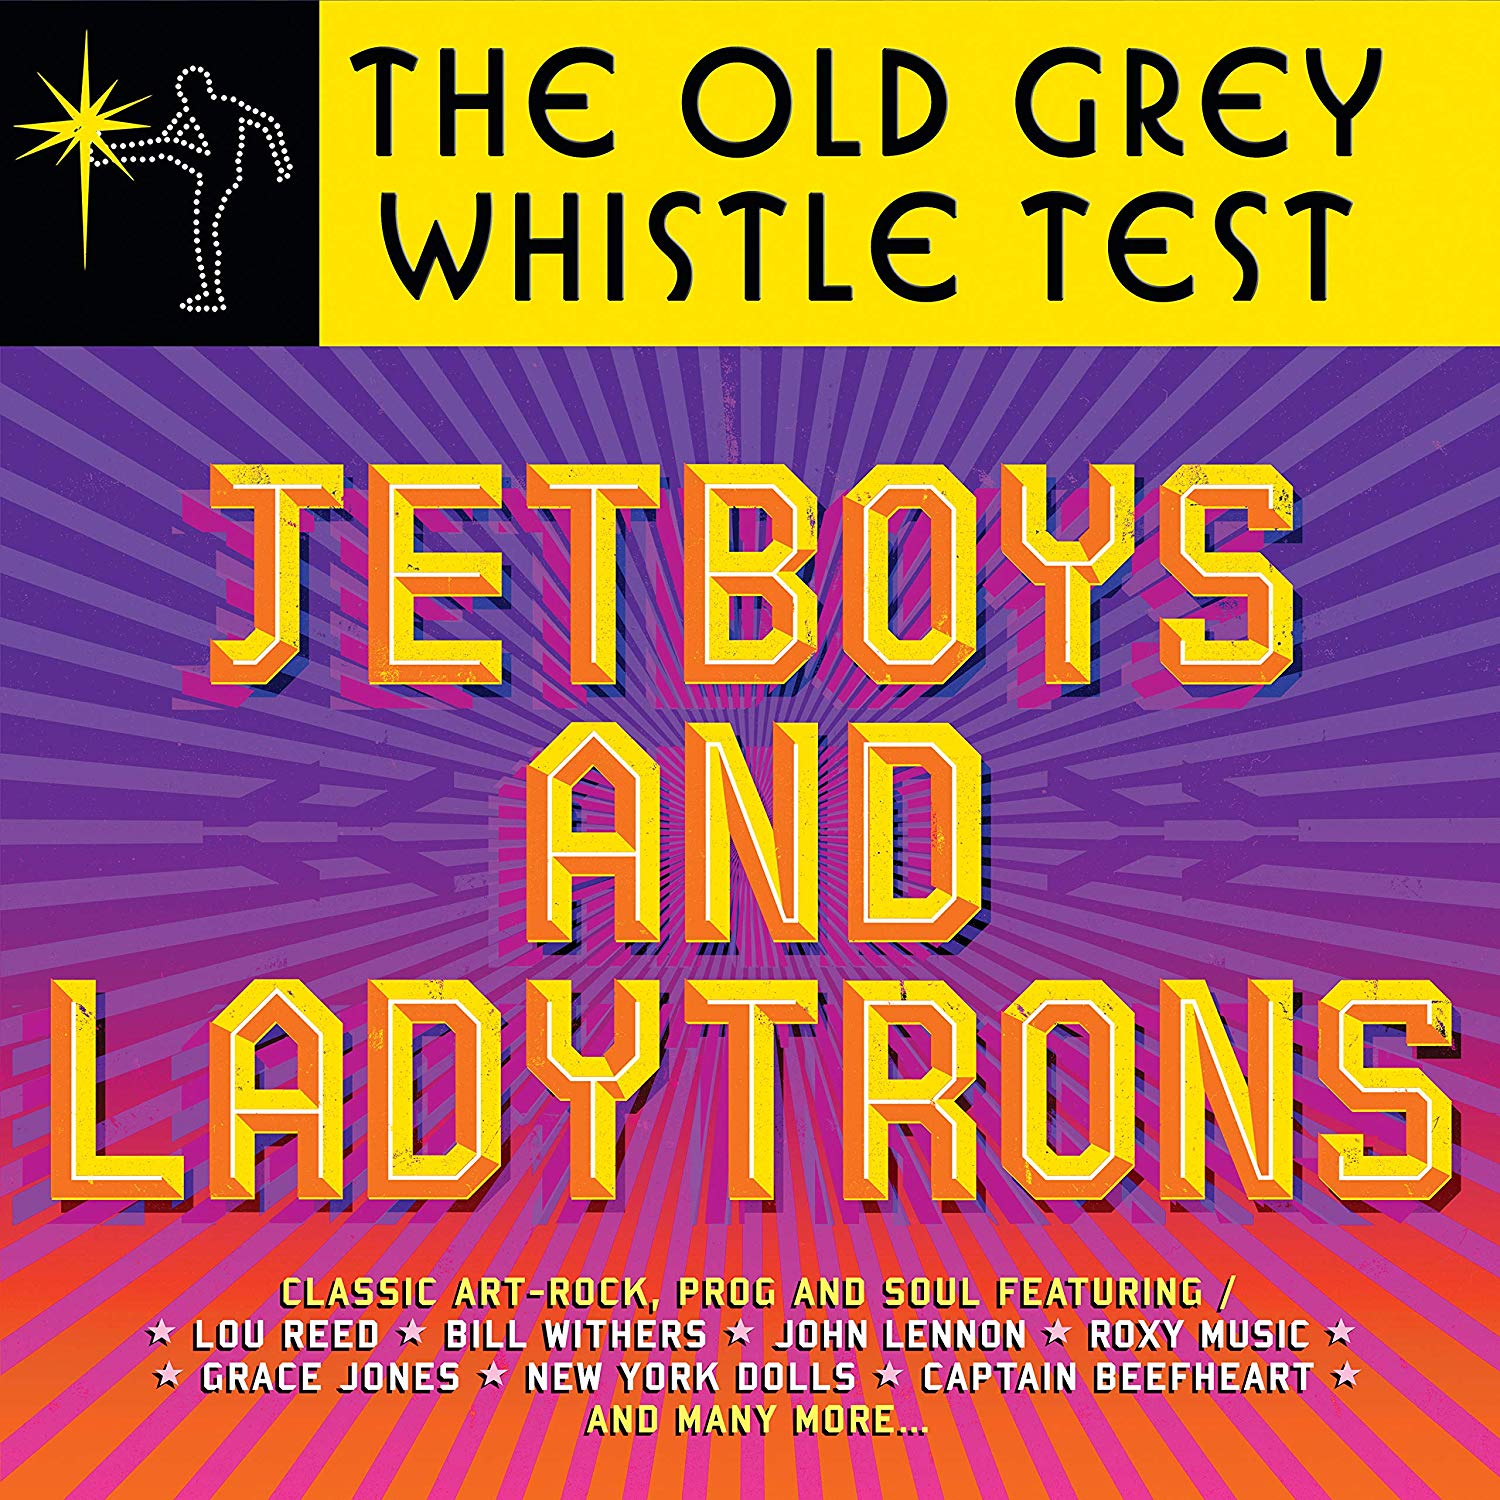 Various Artists - Old Grey Whistle Test: Jet Boys & Lady / Various vinyl cover